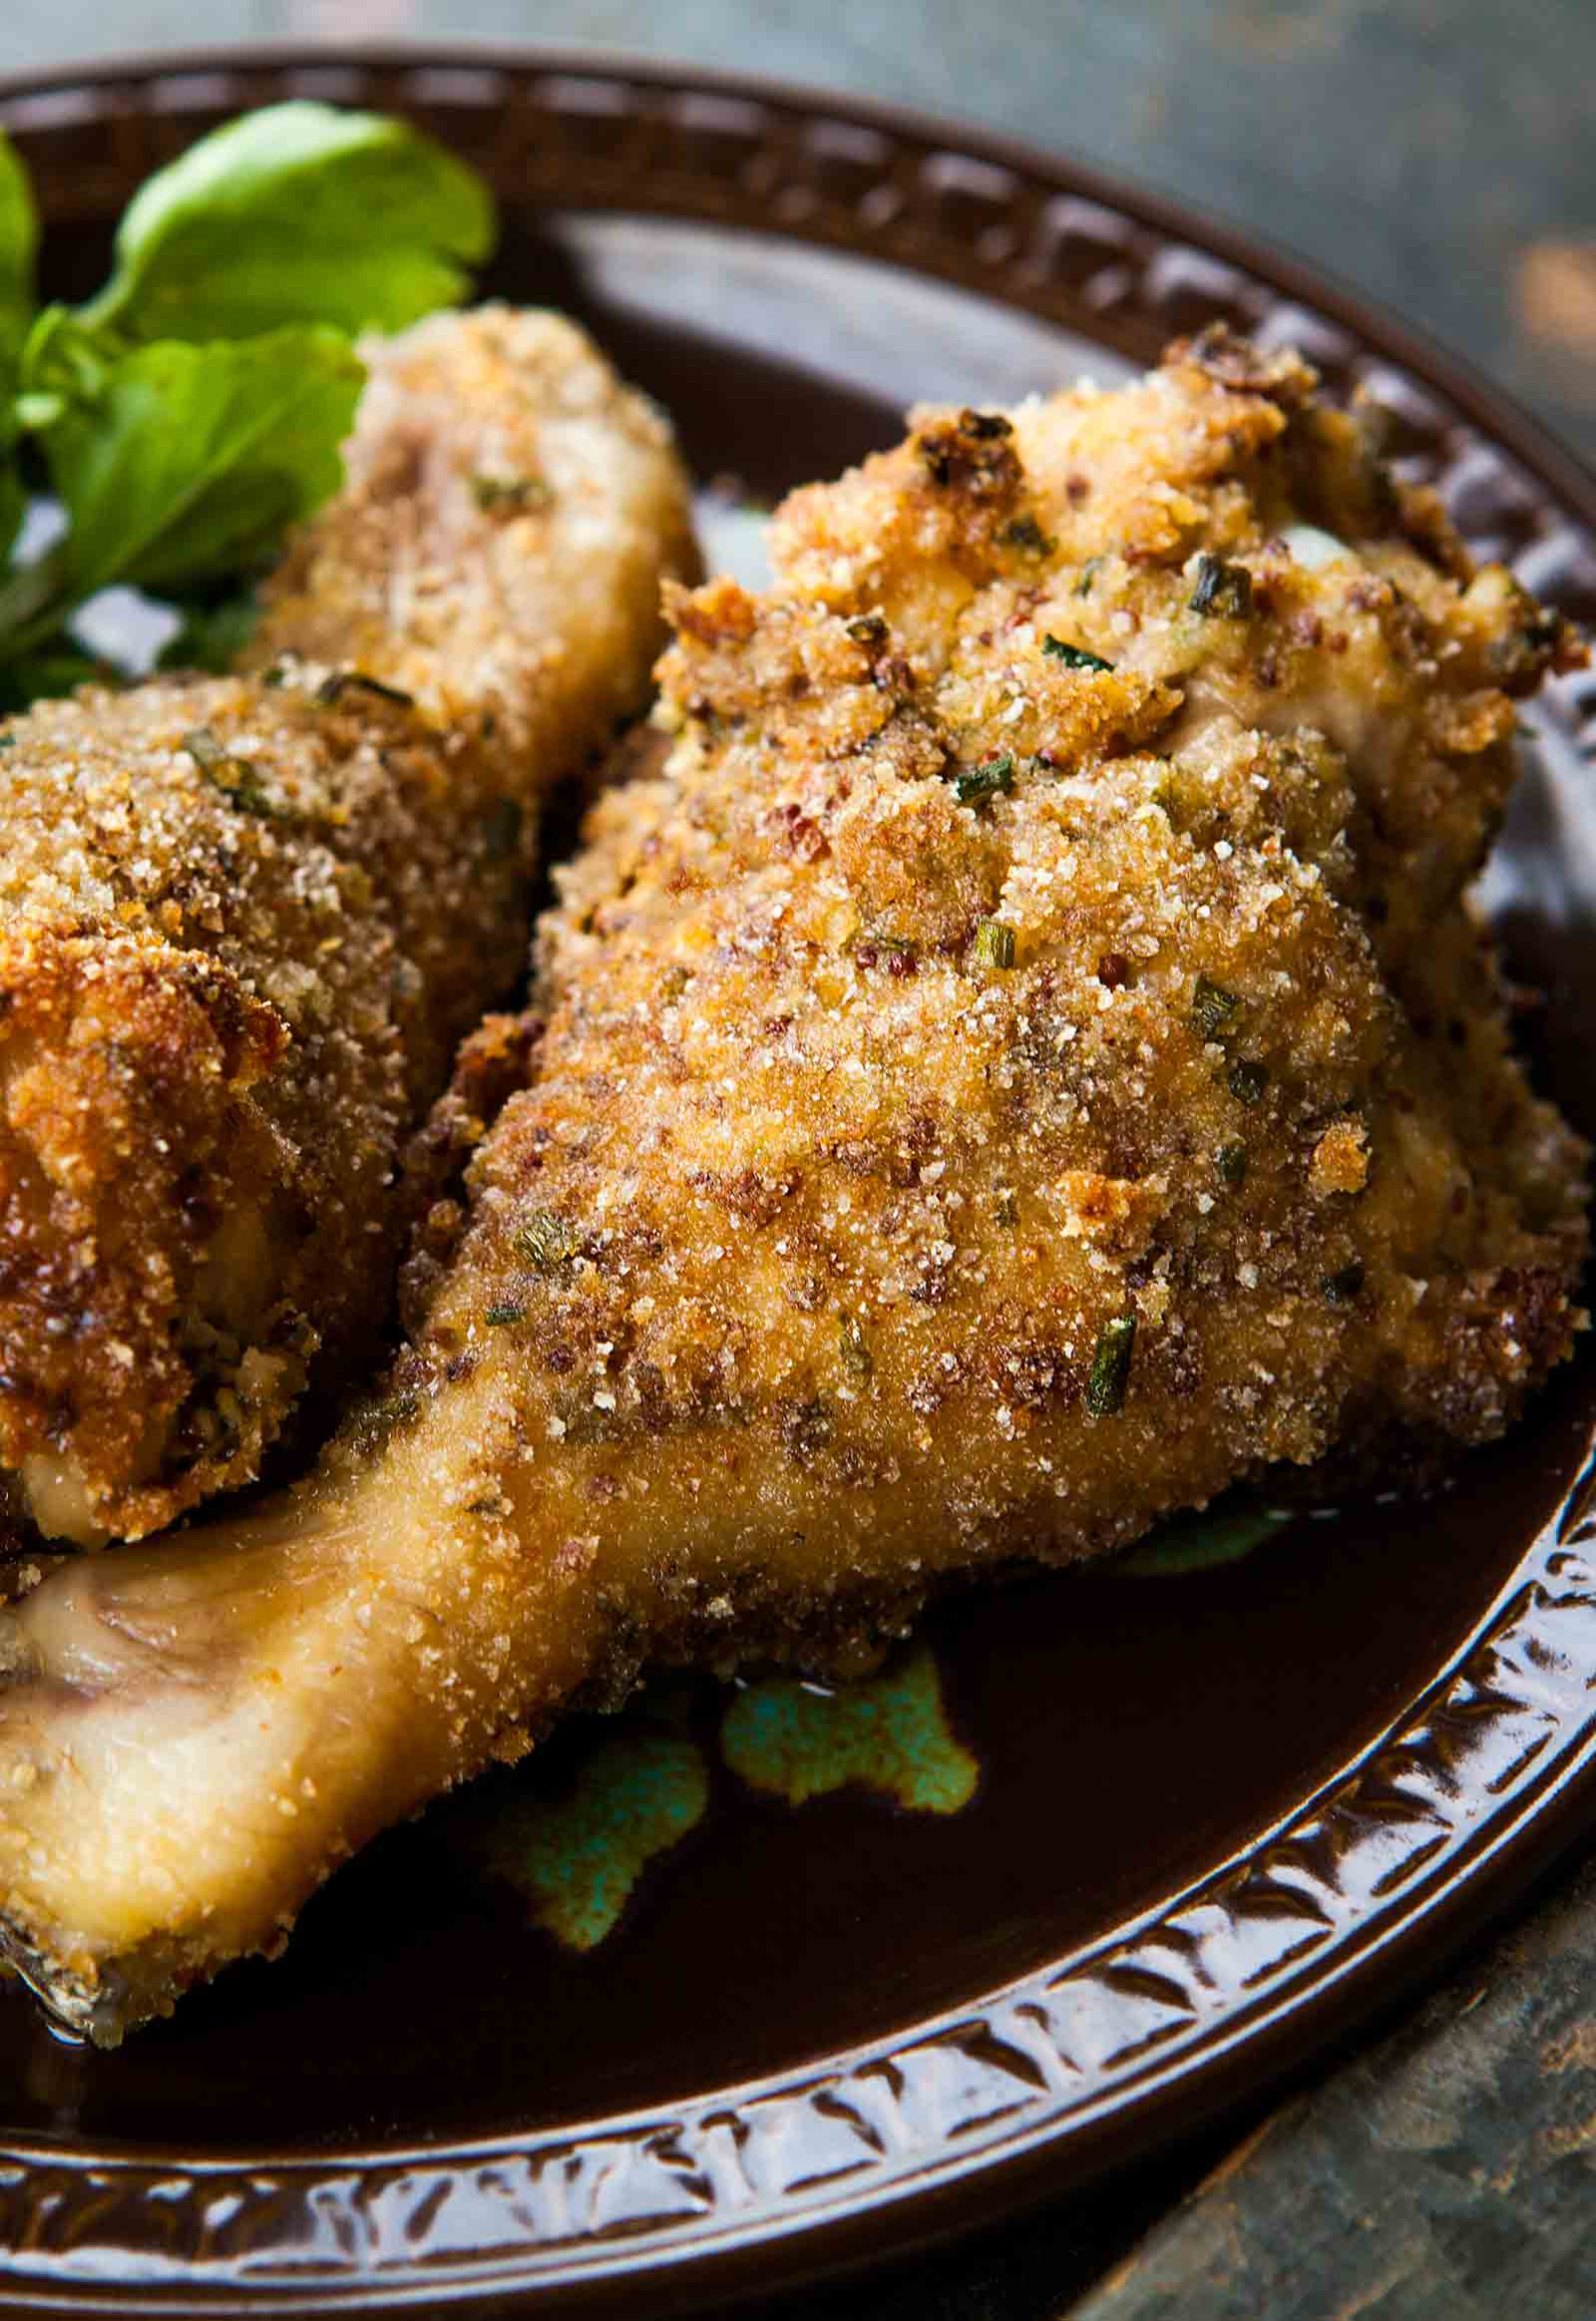 Recipes For Baked Chicken
 Breaded and Baked Chicken Drumsticks Recipe